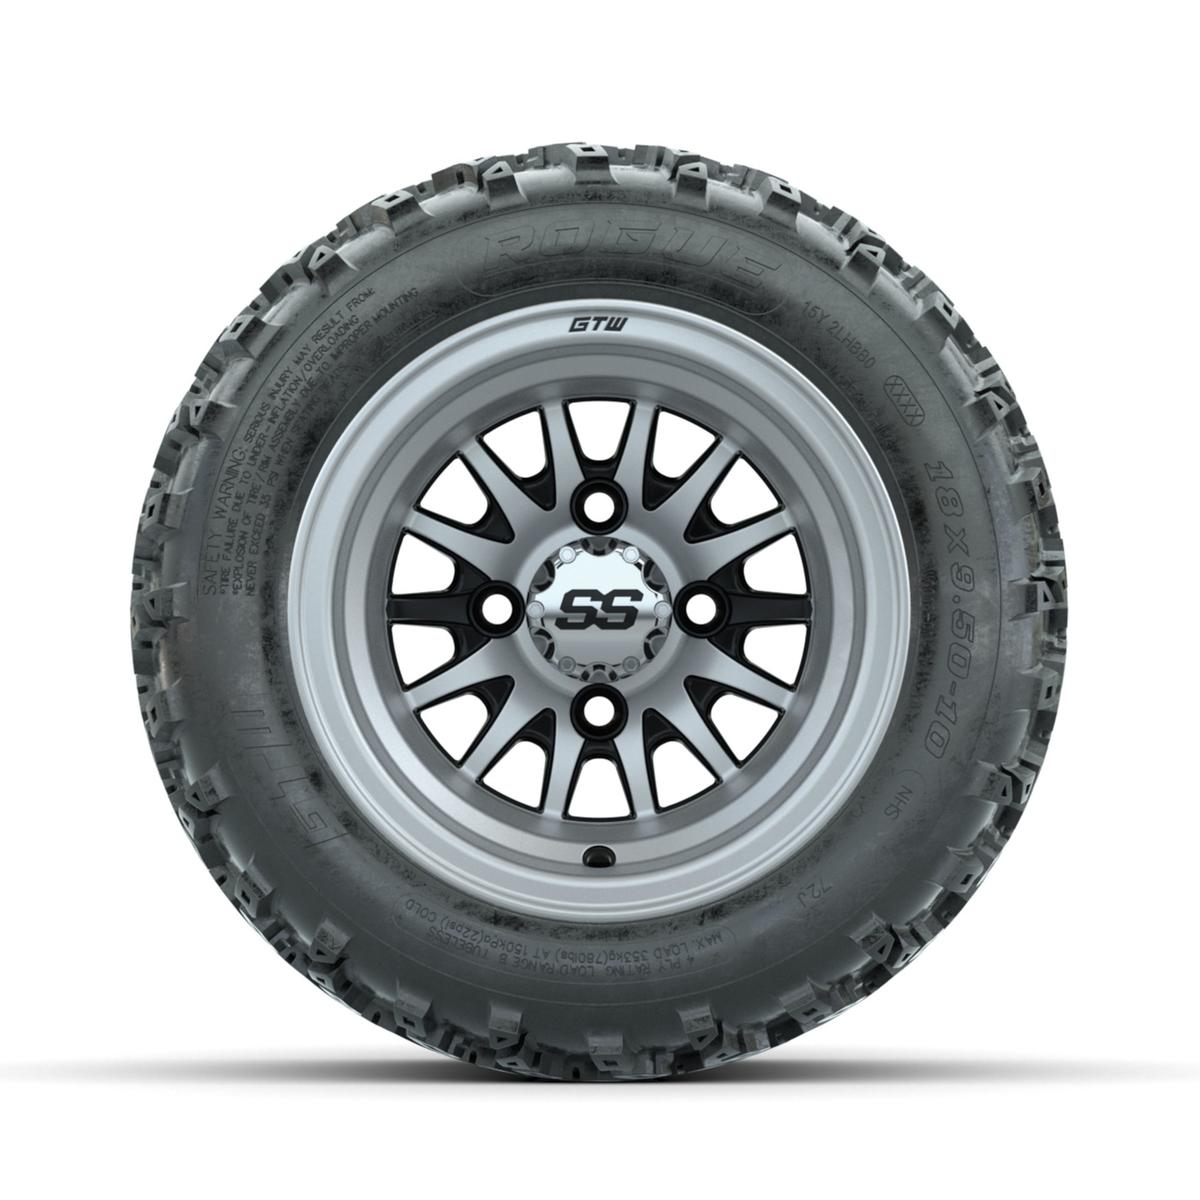 GTW Medusa Machined/Black 10 in Wheels with 18x9.50-10 Rogue All Terrain Tires – Full Set